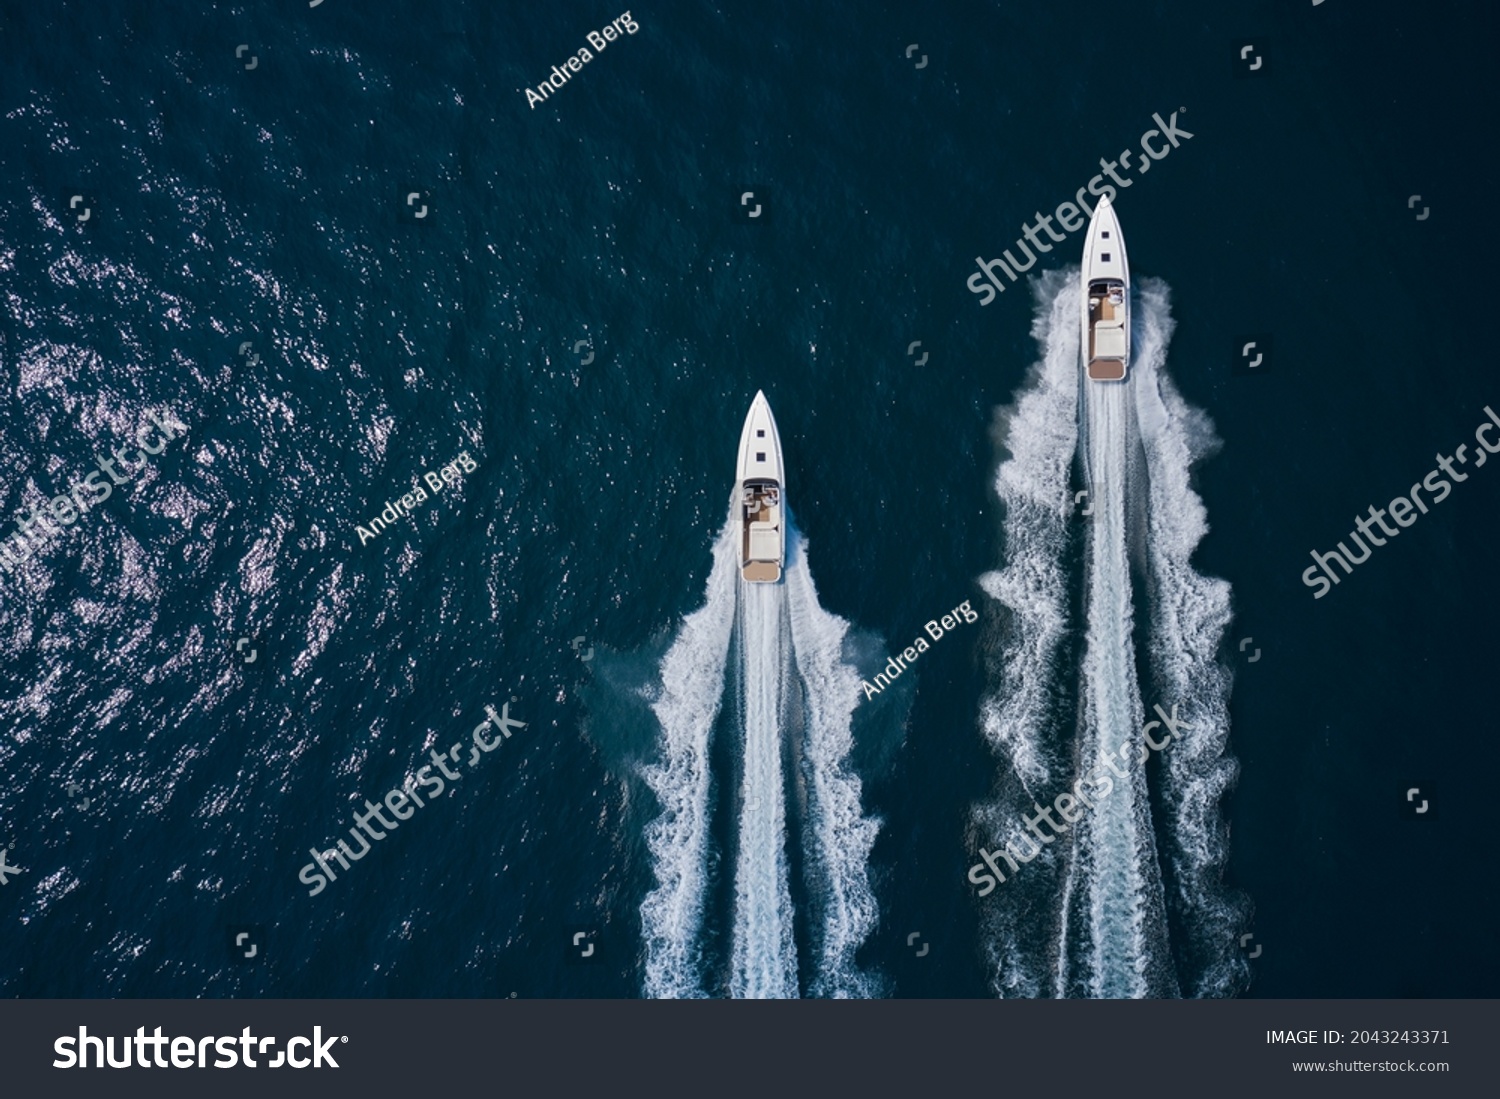 Speed boats movement on the water. Speed boats on dark blue water aerial view. Two speed boats moving fast on dark blue water.. Large white boat driving on dark water. #2043243371